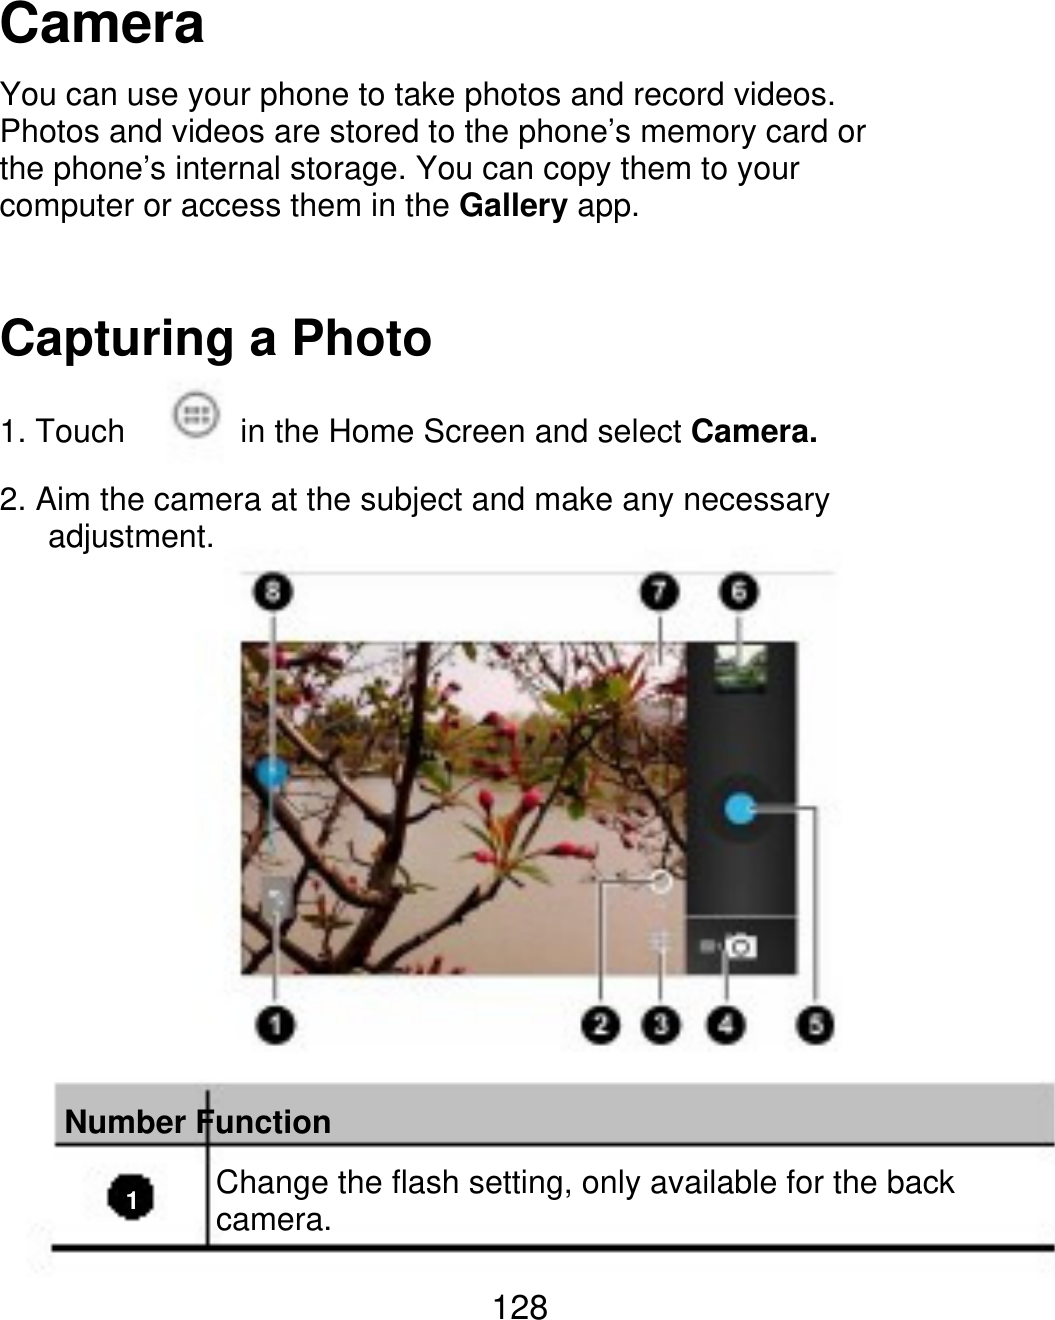 Camera You can use your phone to take photos and record videos. Photos and videos are stored to the phone’s memory card or the phone’s internal storage. You can copy them to your computer or access them in the Gallery app. Capturing a Photo 1. Touch in the Home Screen and select Camera. 2. Aim the camera at the subject and make any necessary    adjustment. Number Function 1 Change the flash setting, only available for the back camera. 128 